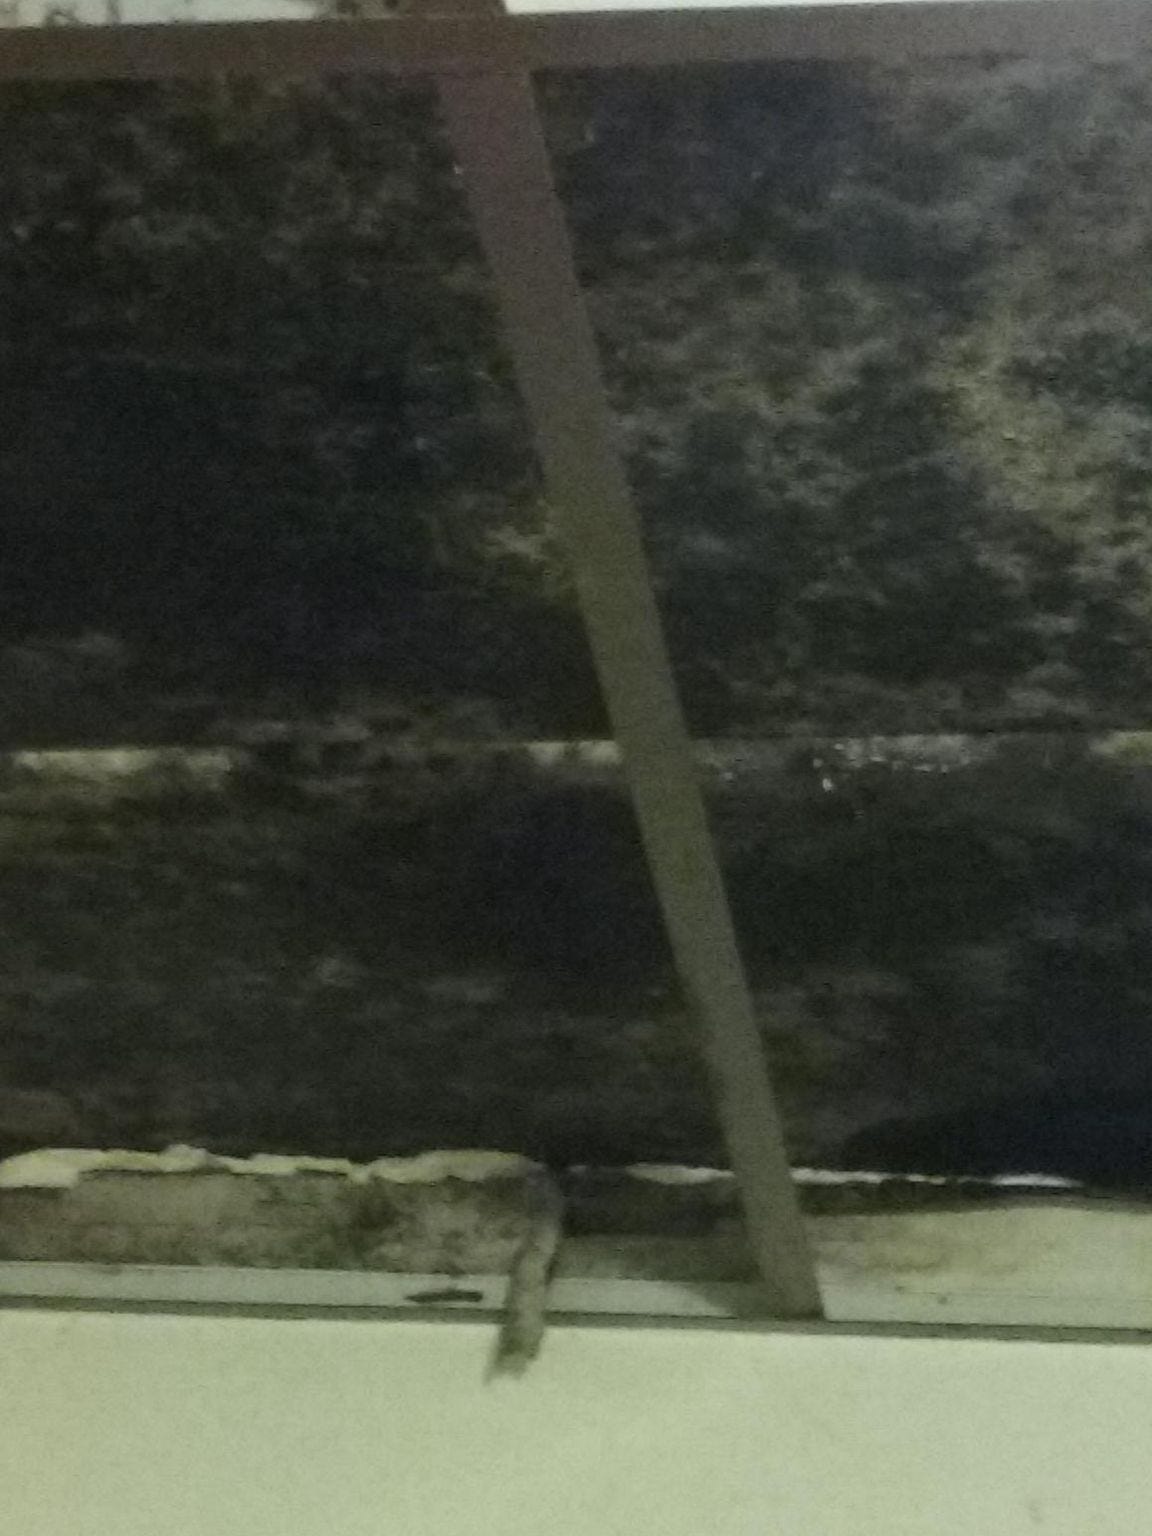 Mold visible on the ceiling of Jashauna Creadle's bedroom